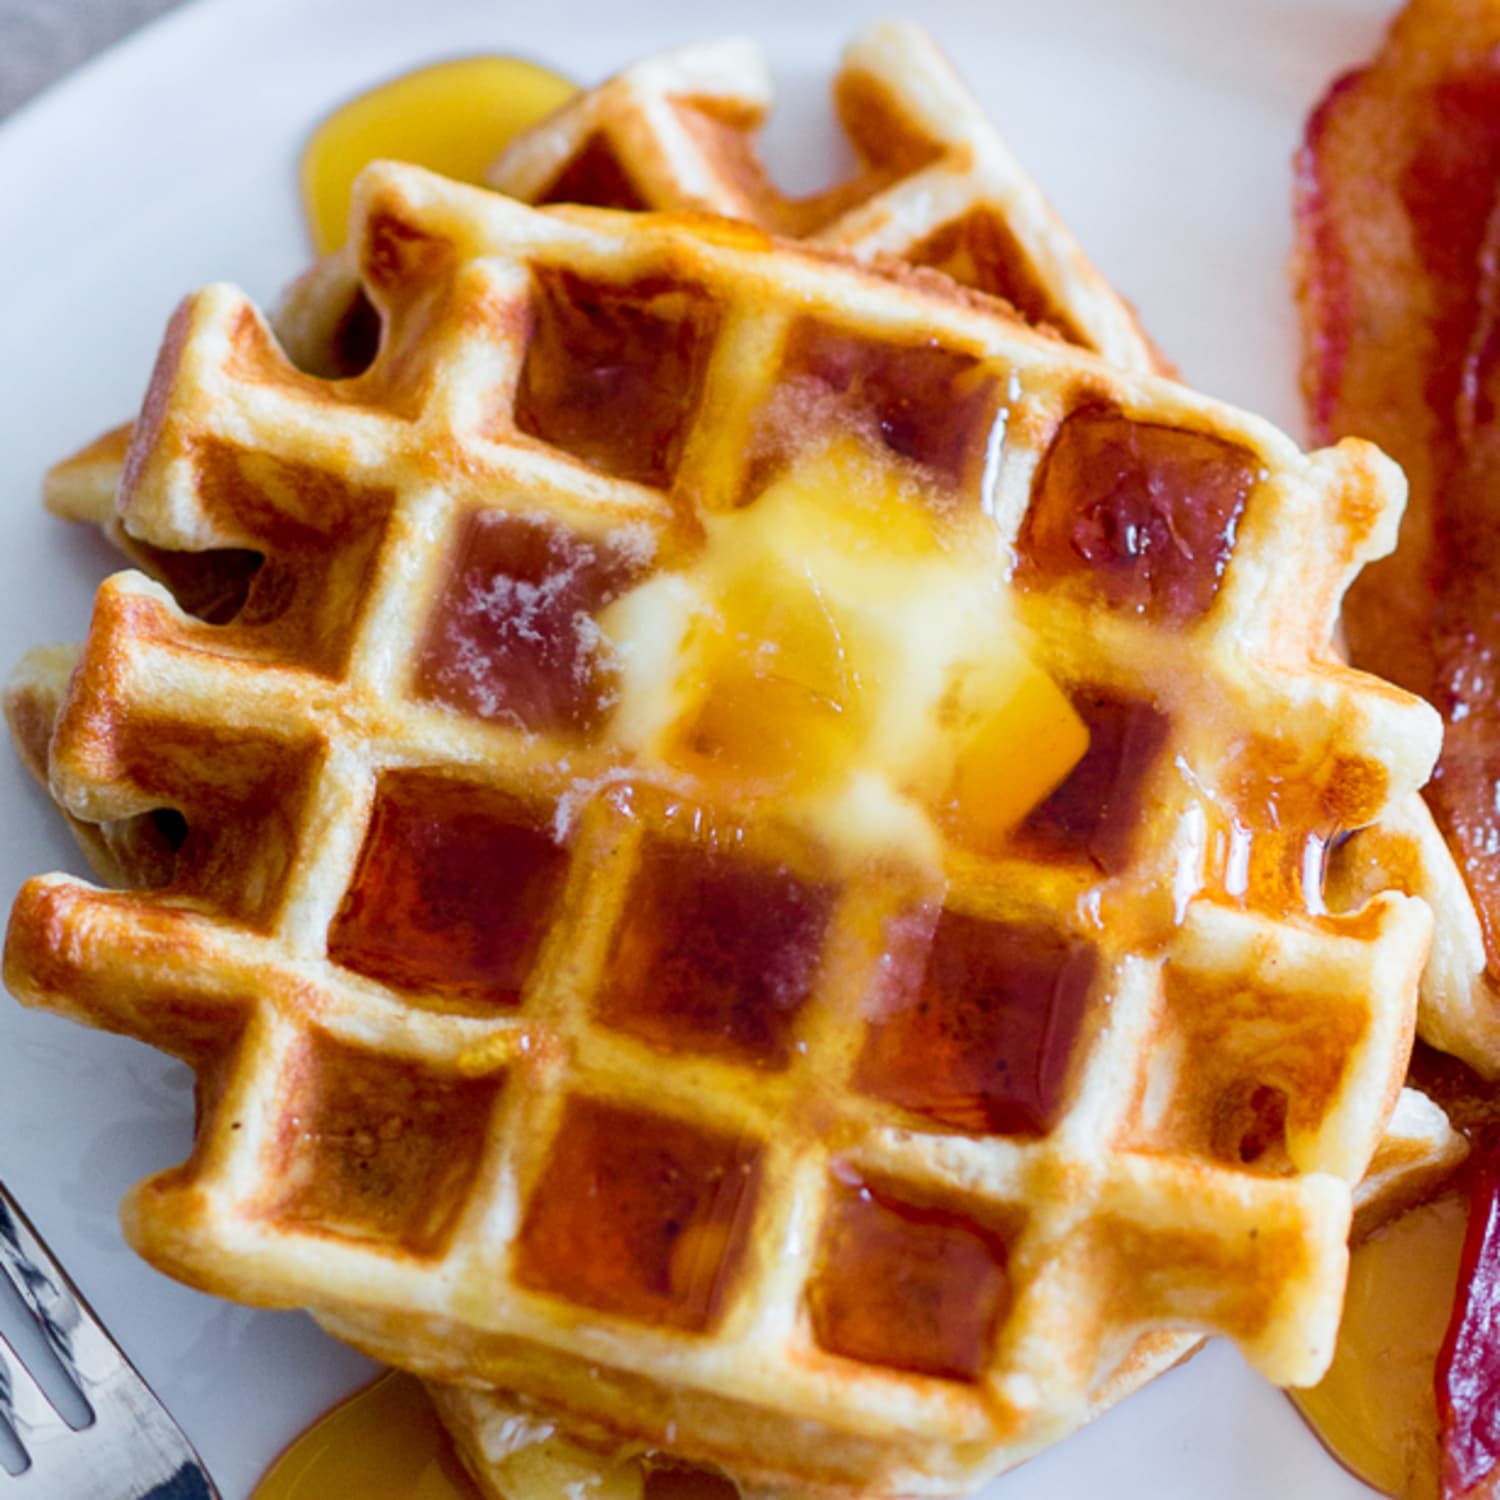 Crispy, Thin Waffle Maker For Sweet and Savory Waffles - My Delicious Sweets